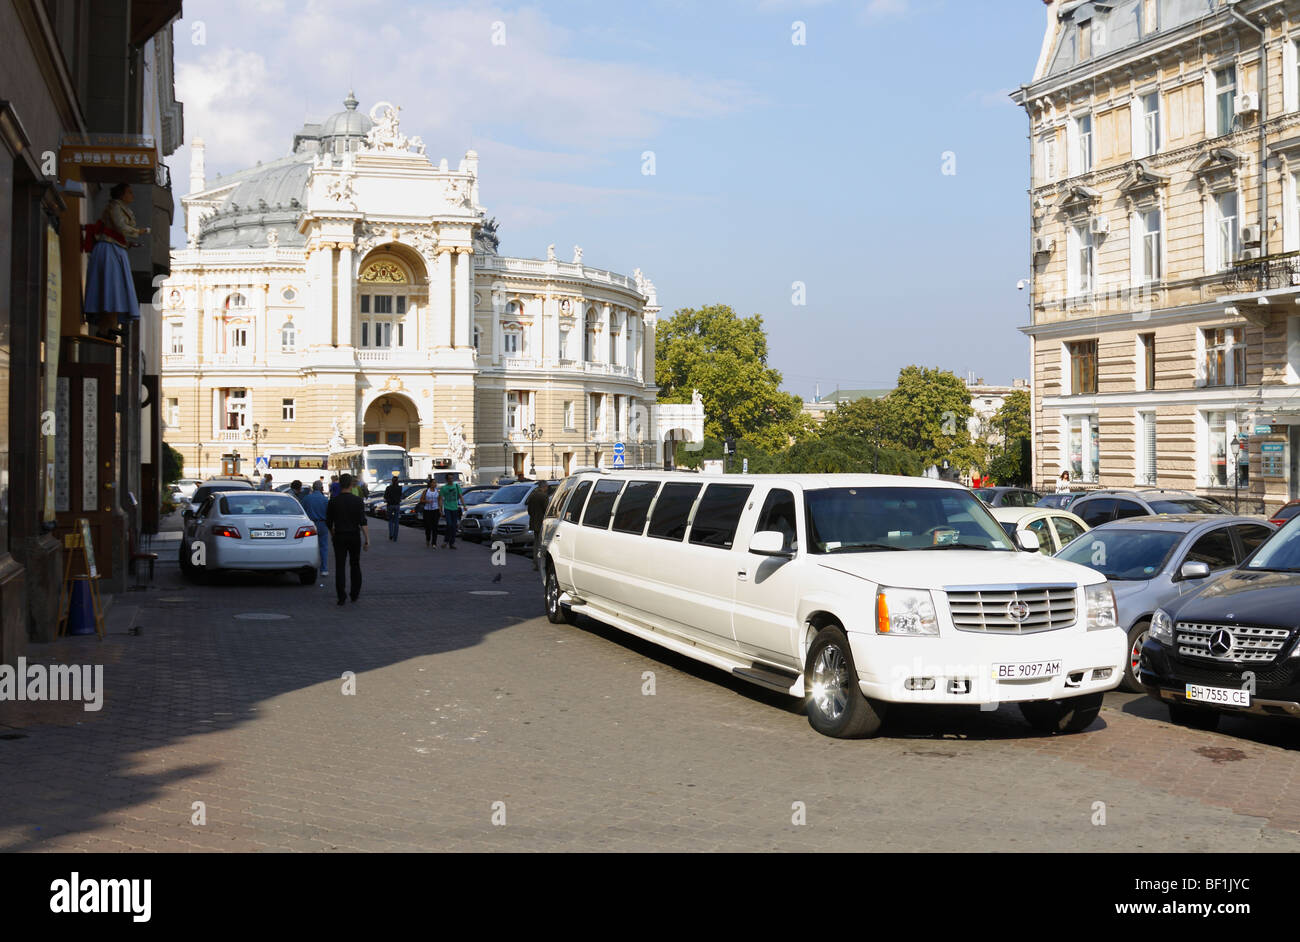 White limousine parked front of The Opera House (Building), Odessa, Ukraine, October 2009 Stock Photo